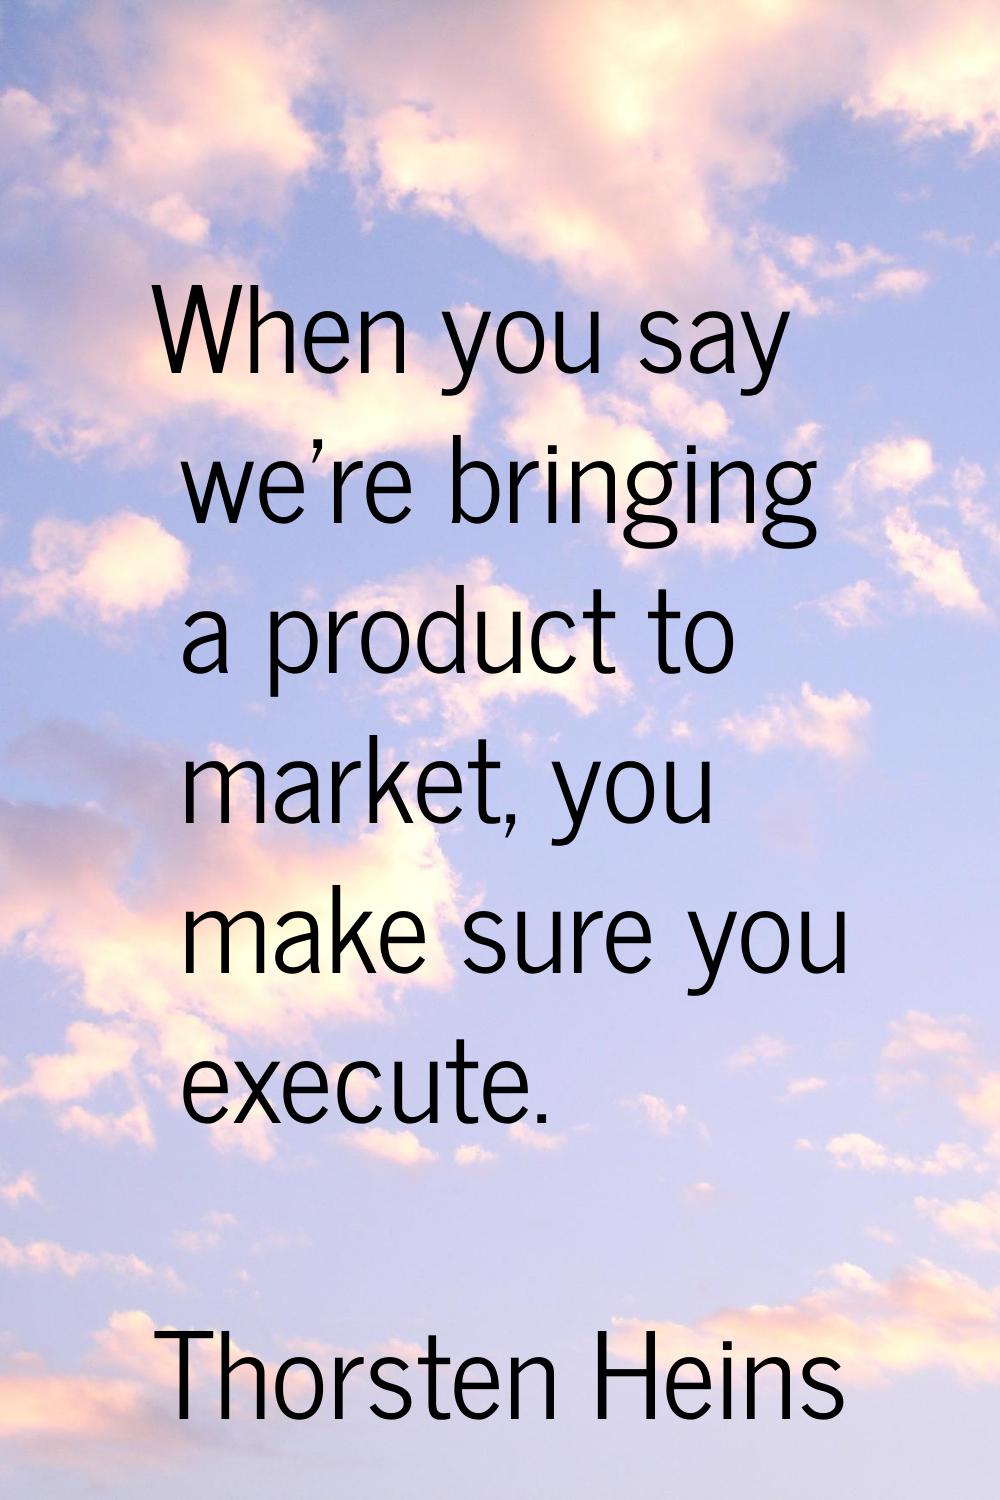 When you say we're bringing a product to market, you make sure you execute.